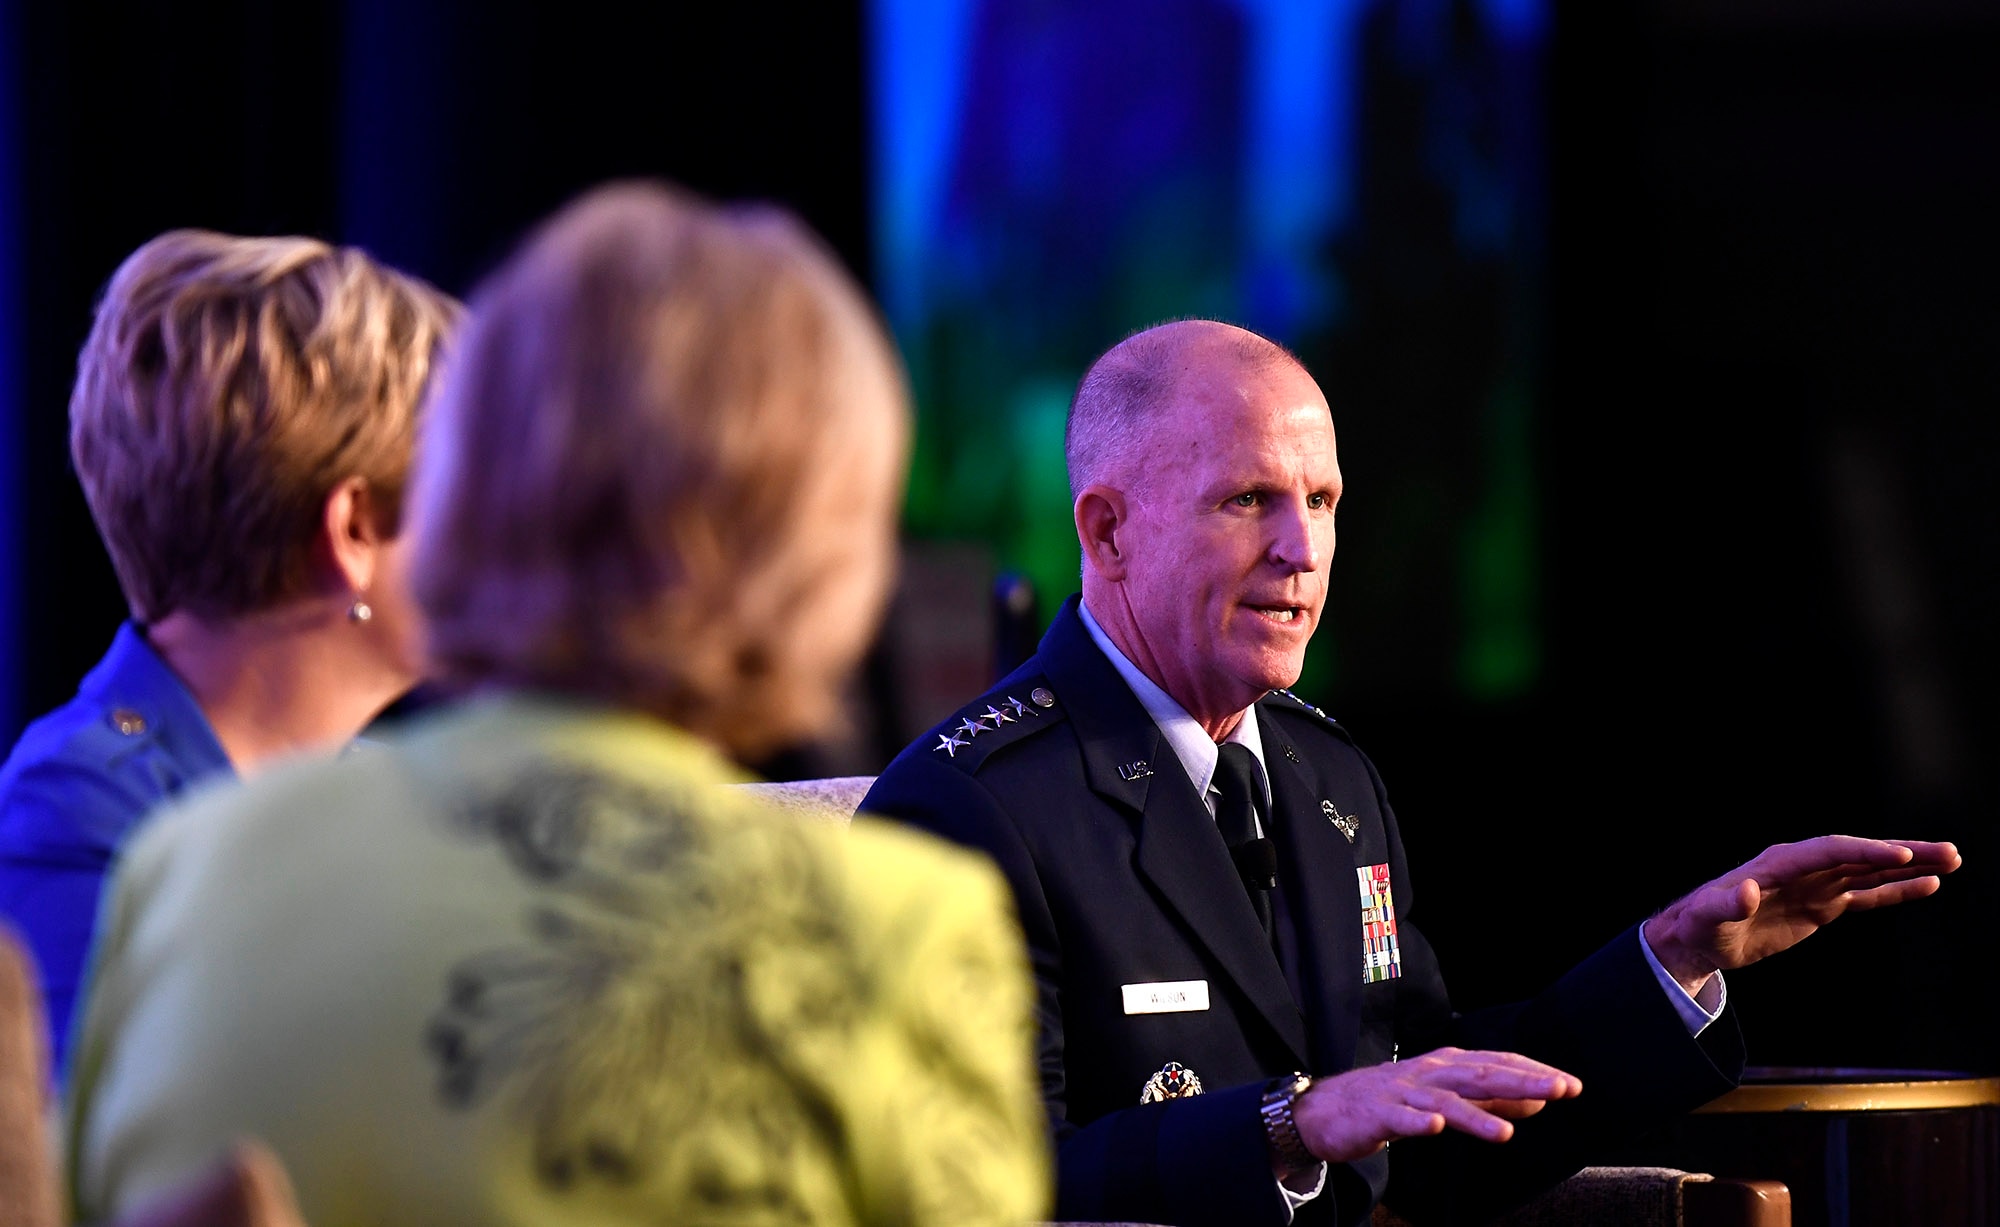 Air Force Vice Chief of Staff Gen. Stephen W. Wilson speaks during the Military Child Education Coalition National Training Seminar in Washington, D.C., July 24, 2018. The Air Force has continuously placed an emphasis on school age dependent education because of a direct correlation with family resilience to maintain a willingness of families to continue to support their Airman sponsors wherever they are asked to serve. (U.S. Air Force photo by Staff Sgt. Rusty Frank)